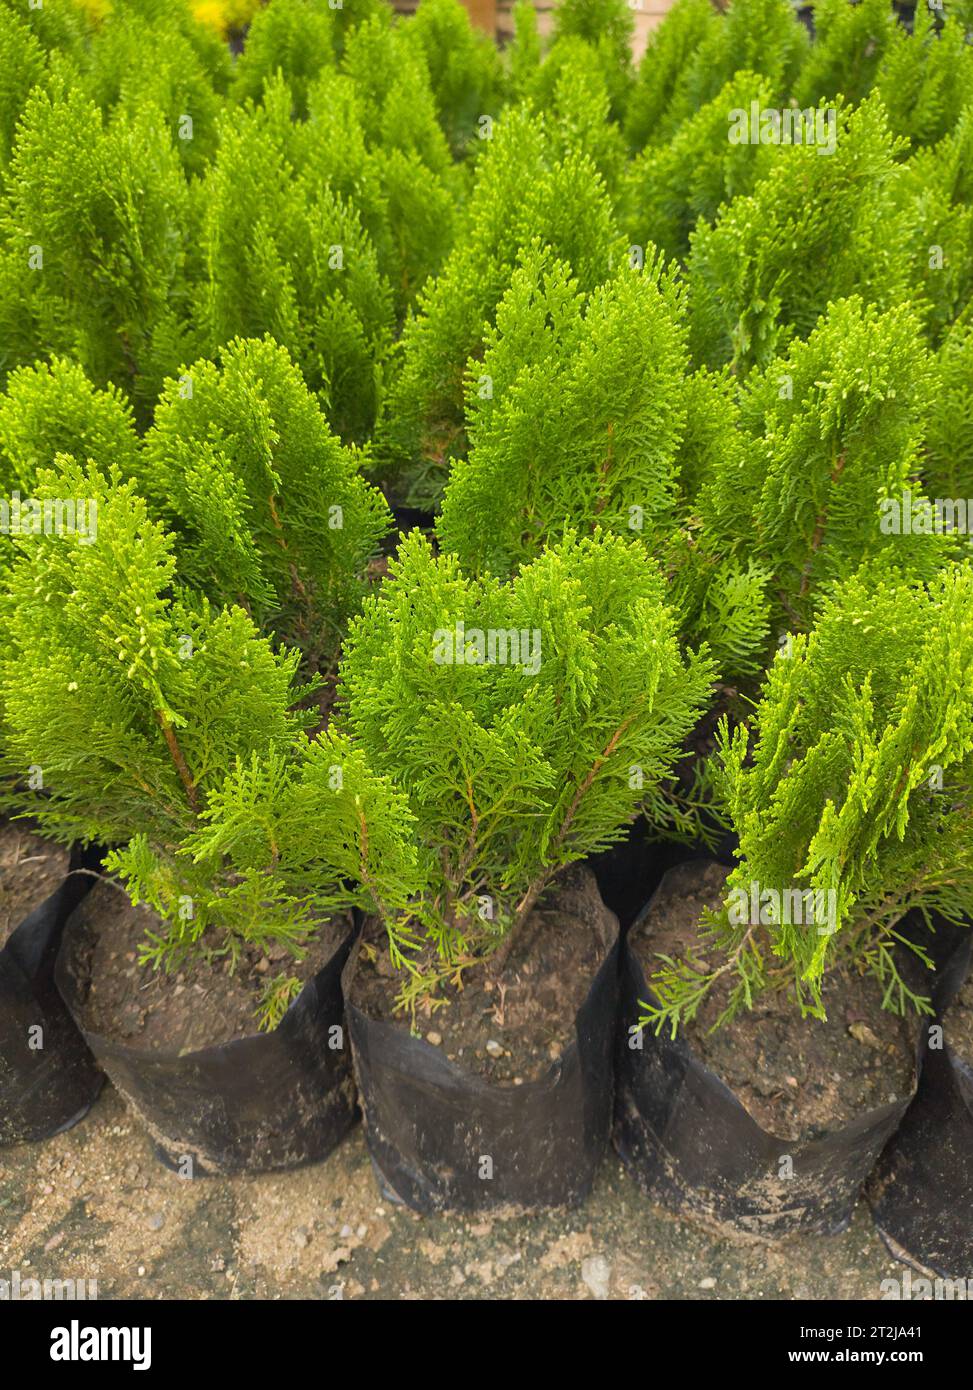 close-up of young cypress plants in grow bags, plant nursery in the garden taken in selective focus Stock Photo